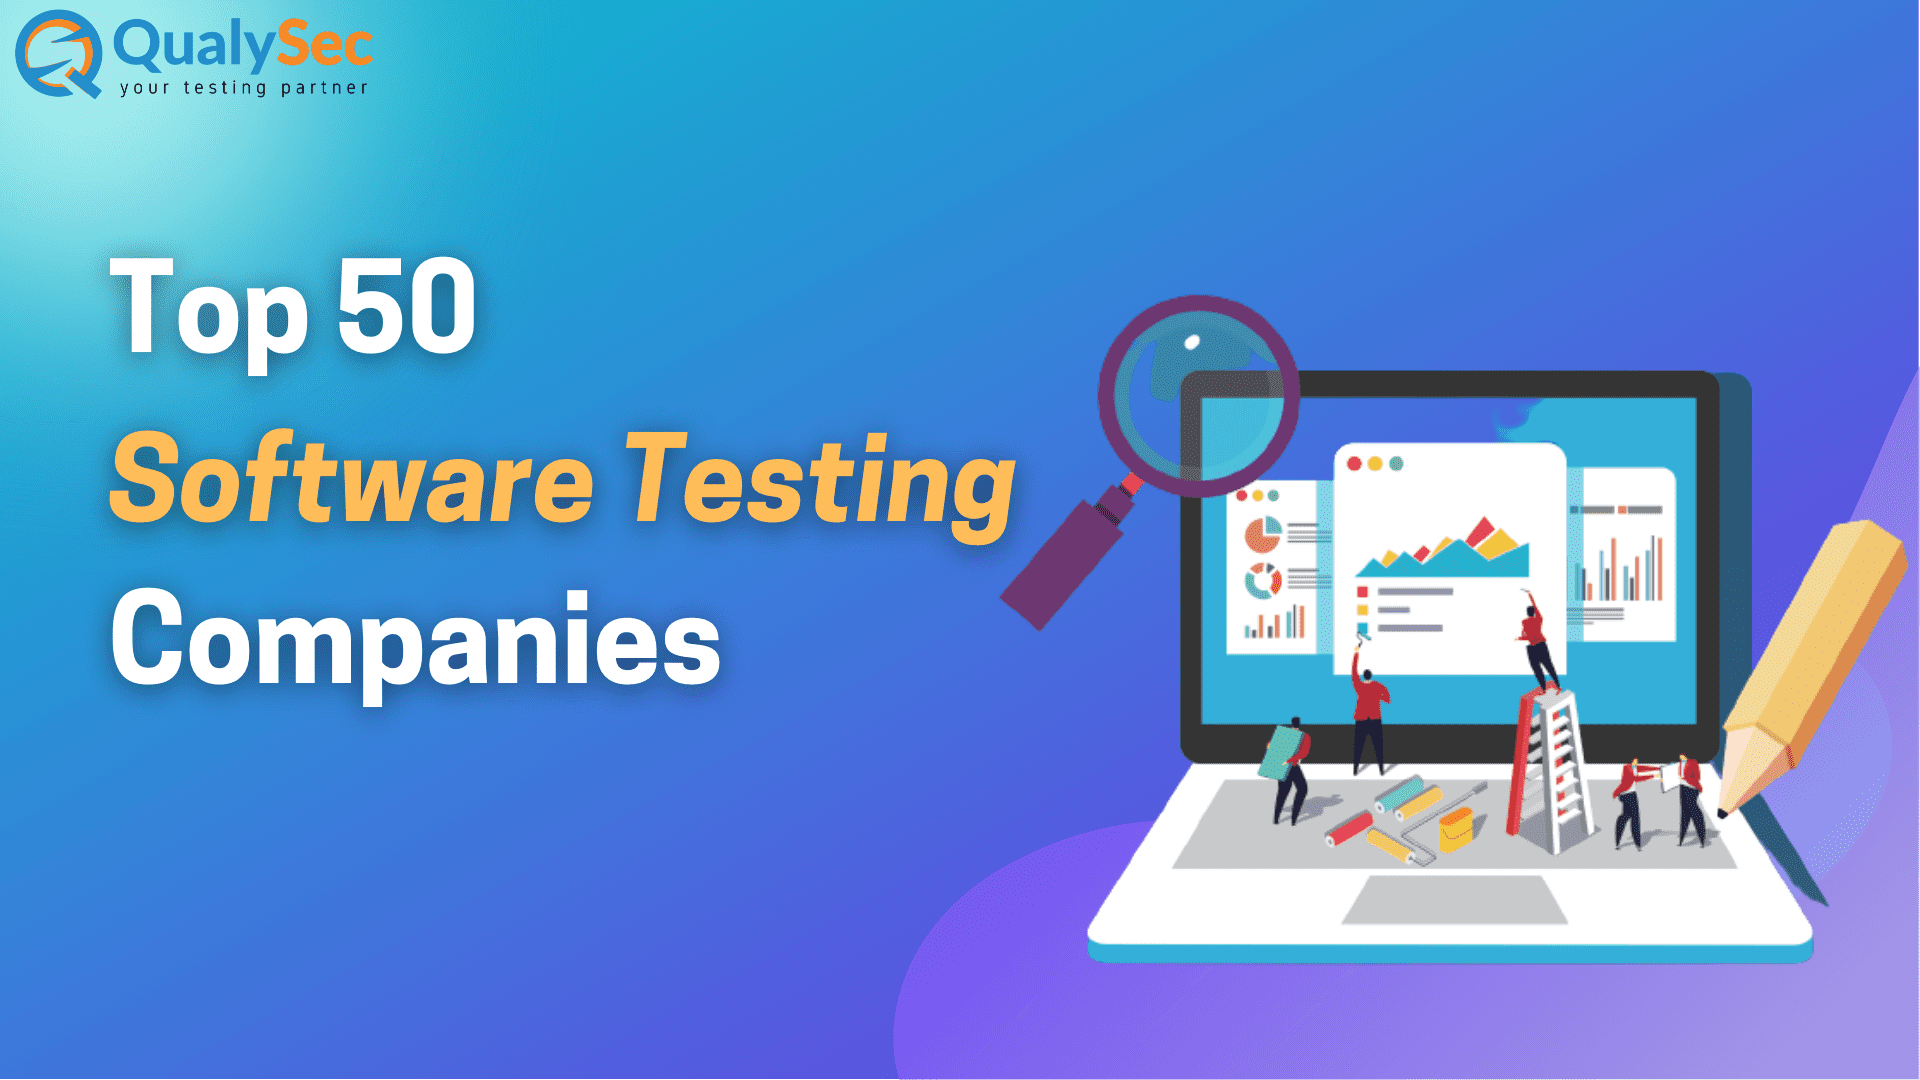 Top 50 Software Testing Companies In 2022